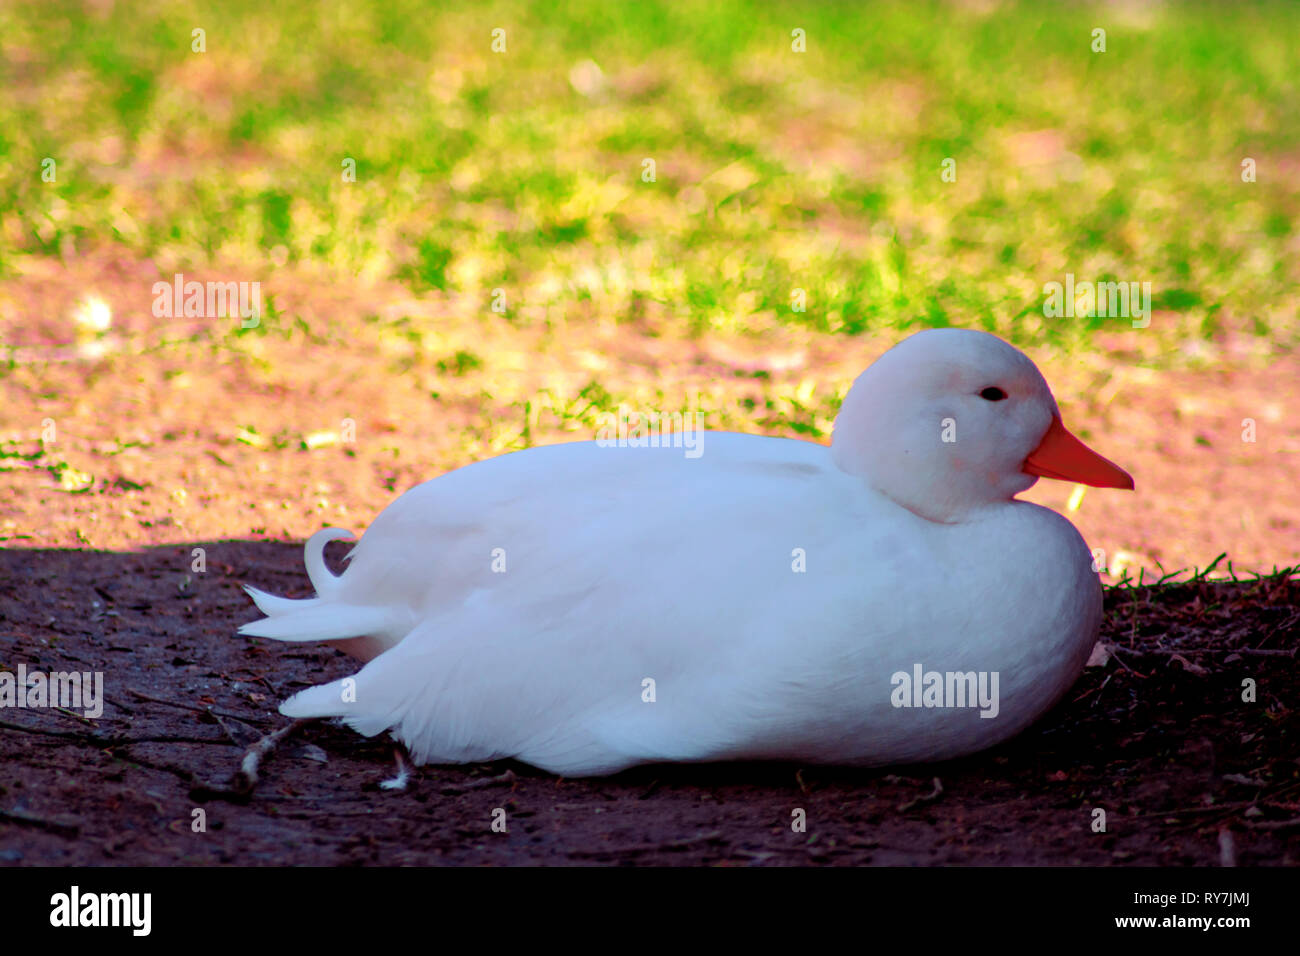 Concept nature : the lazy white duck Stock Photo